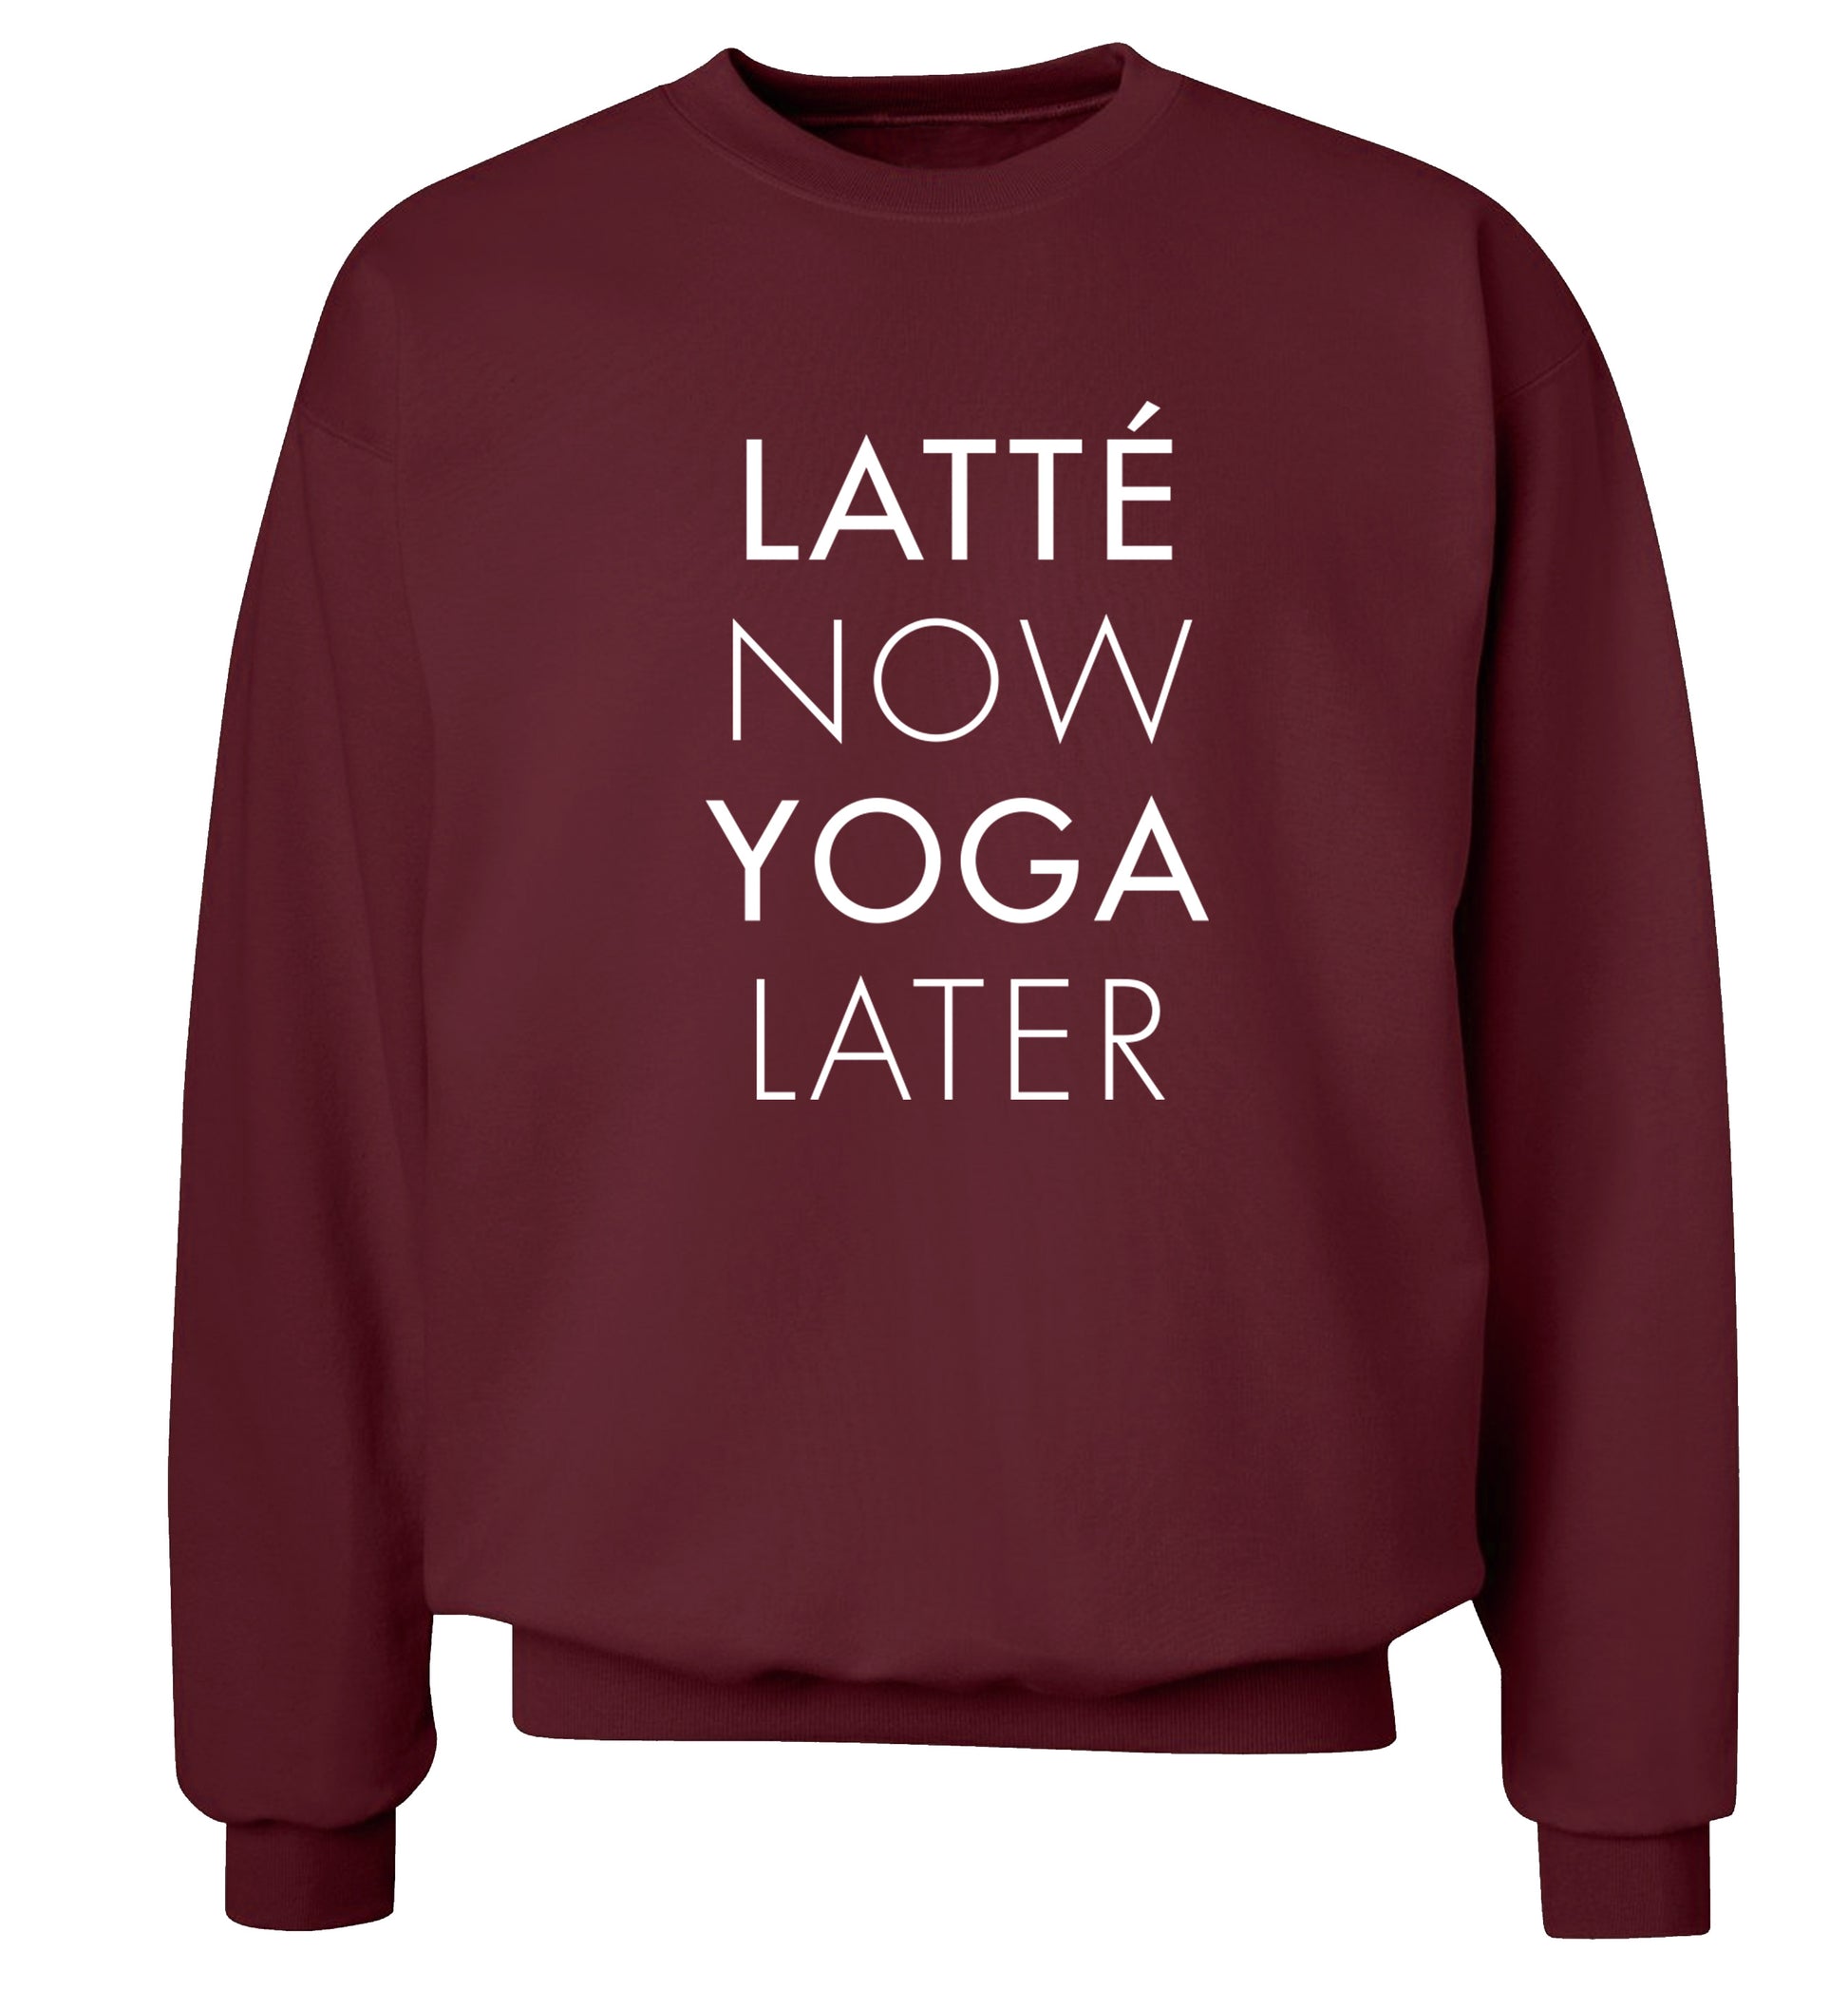 Latte now yoga later Adult's unisex maroon Sweater 2XL